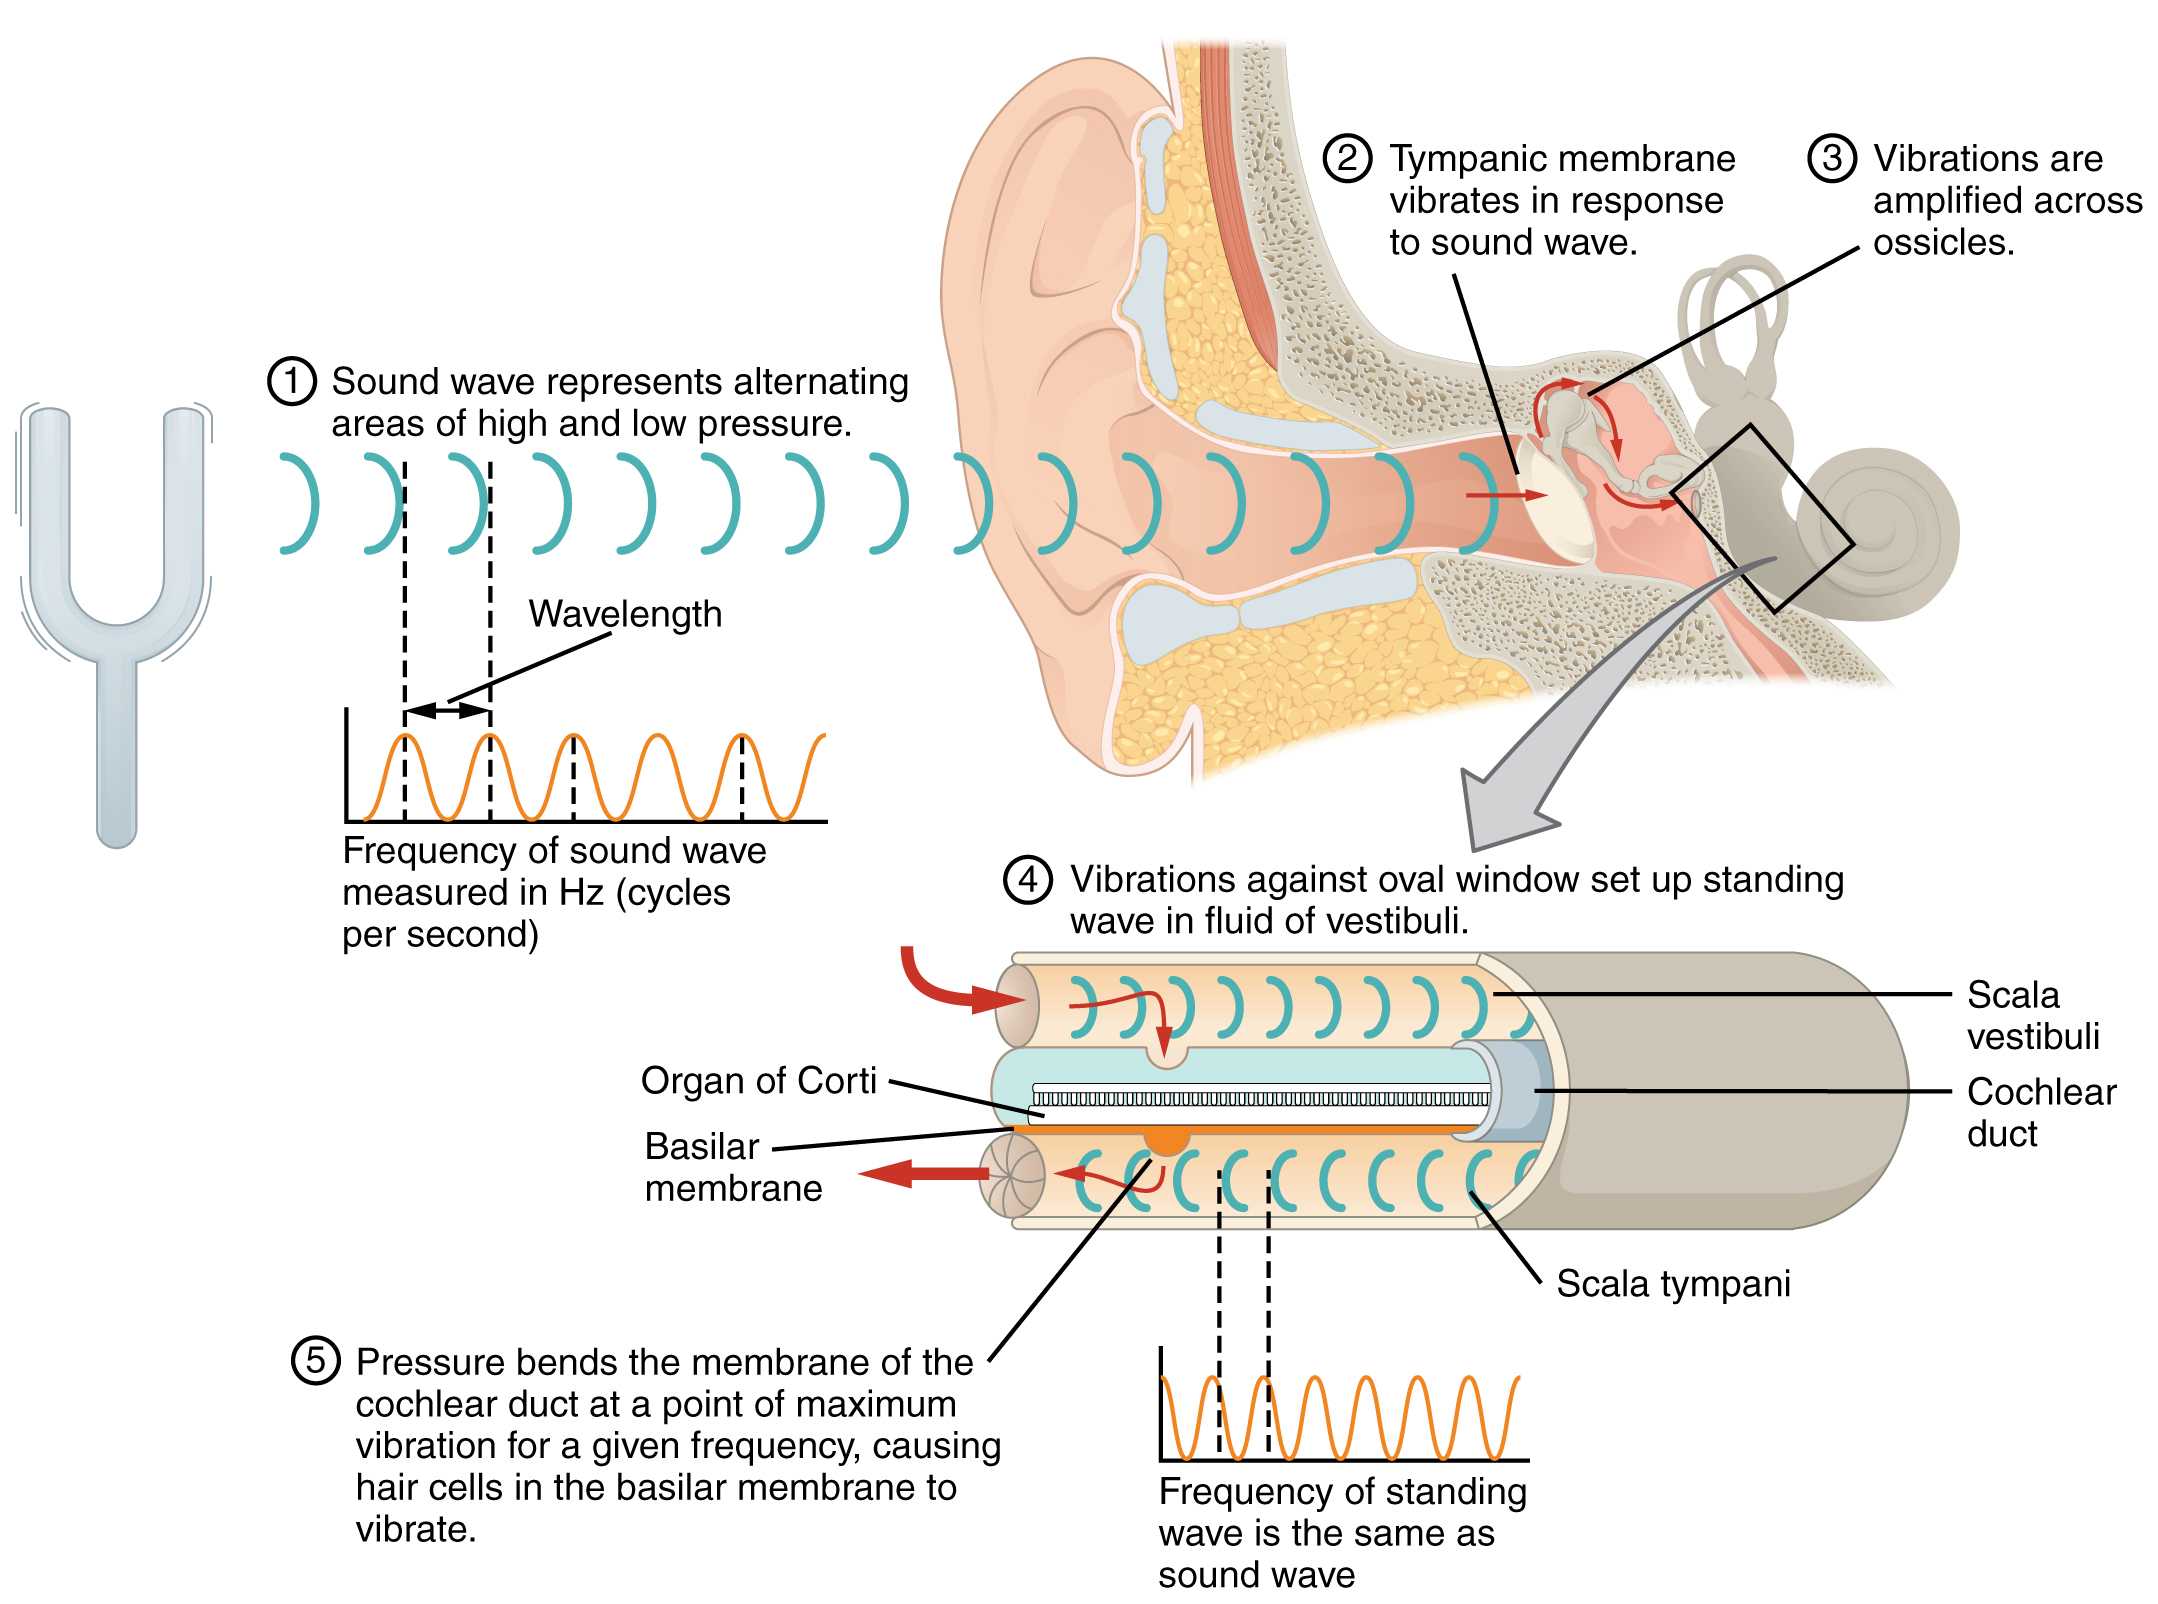 This diagram shows how sound waves travel through the ear, and each step details the process.